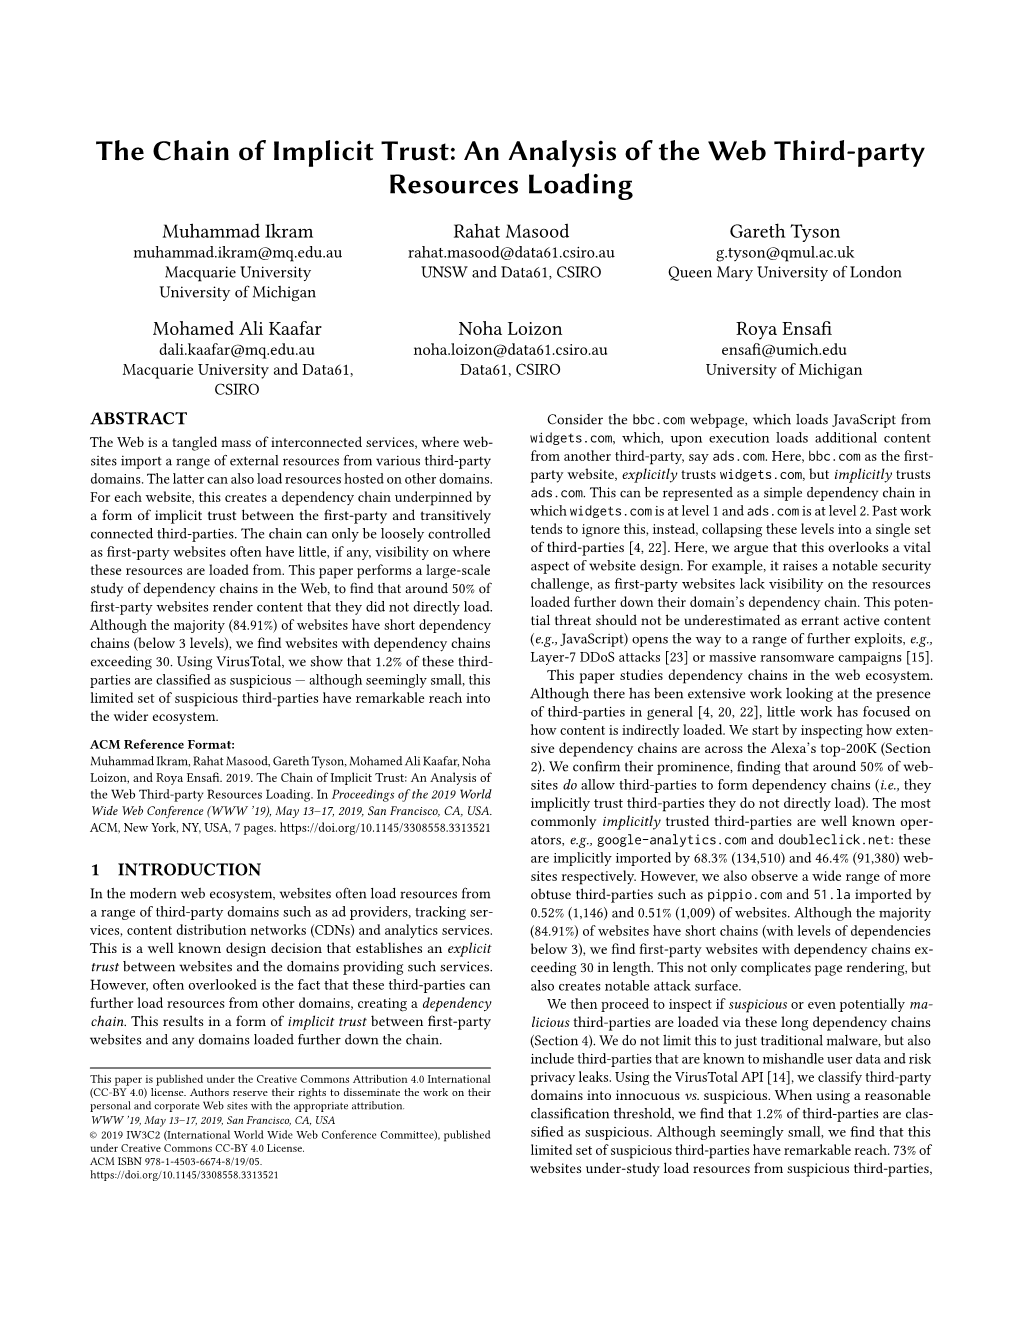 The Chain of Implicit Trust: an Analysis of the Web Third-Party Resources Loading